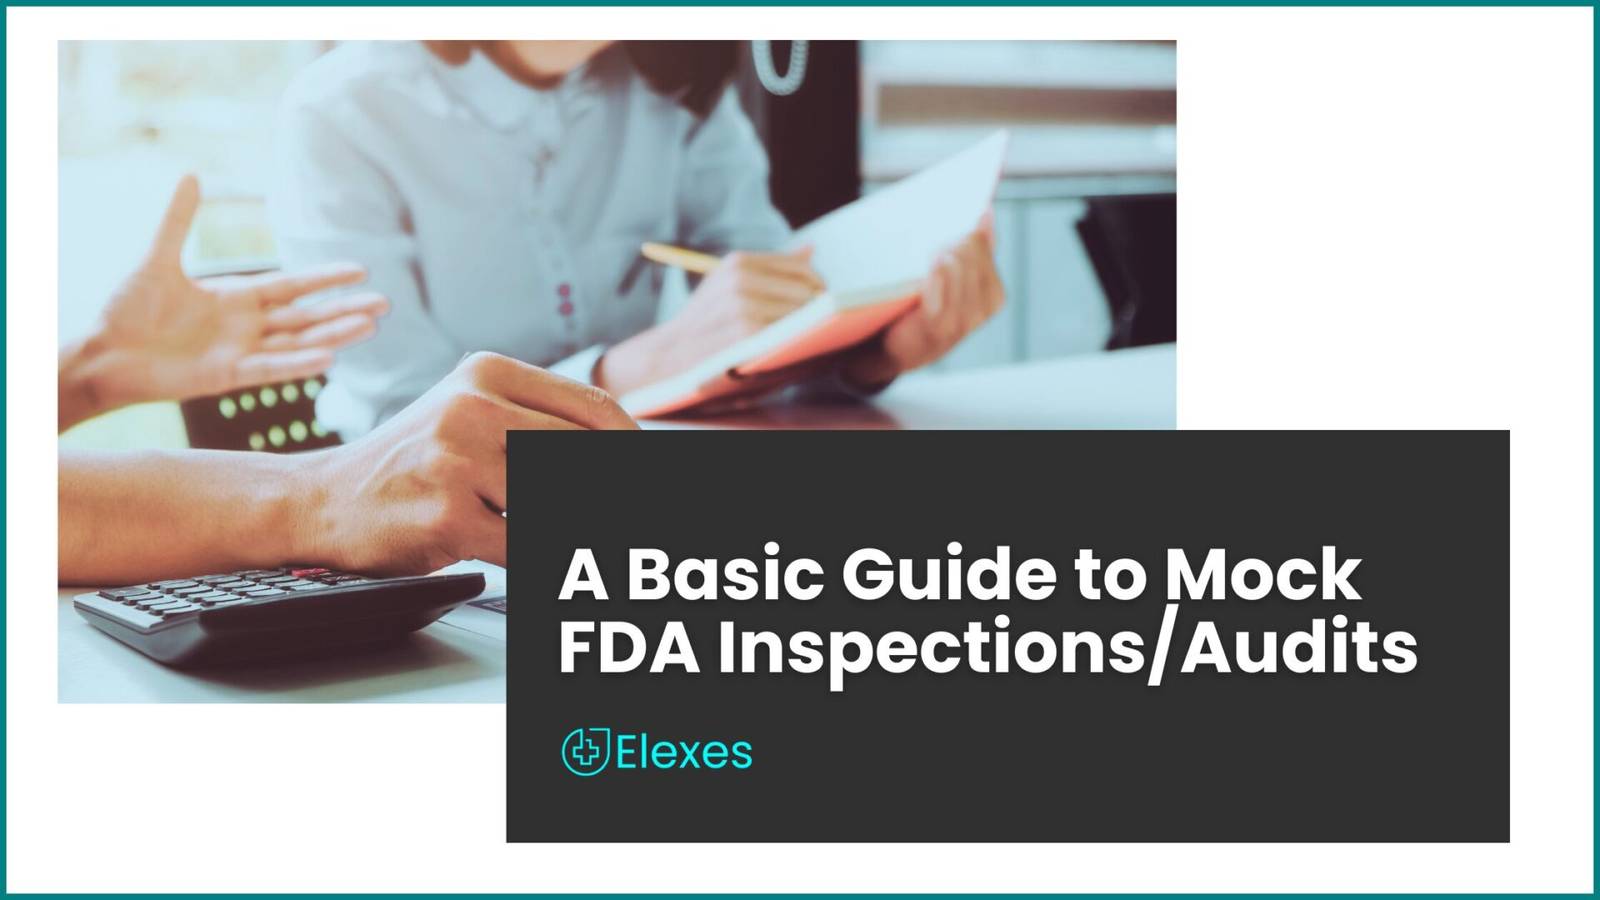 A Basic Guide to Mock FDA Inspections/Audits